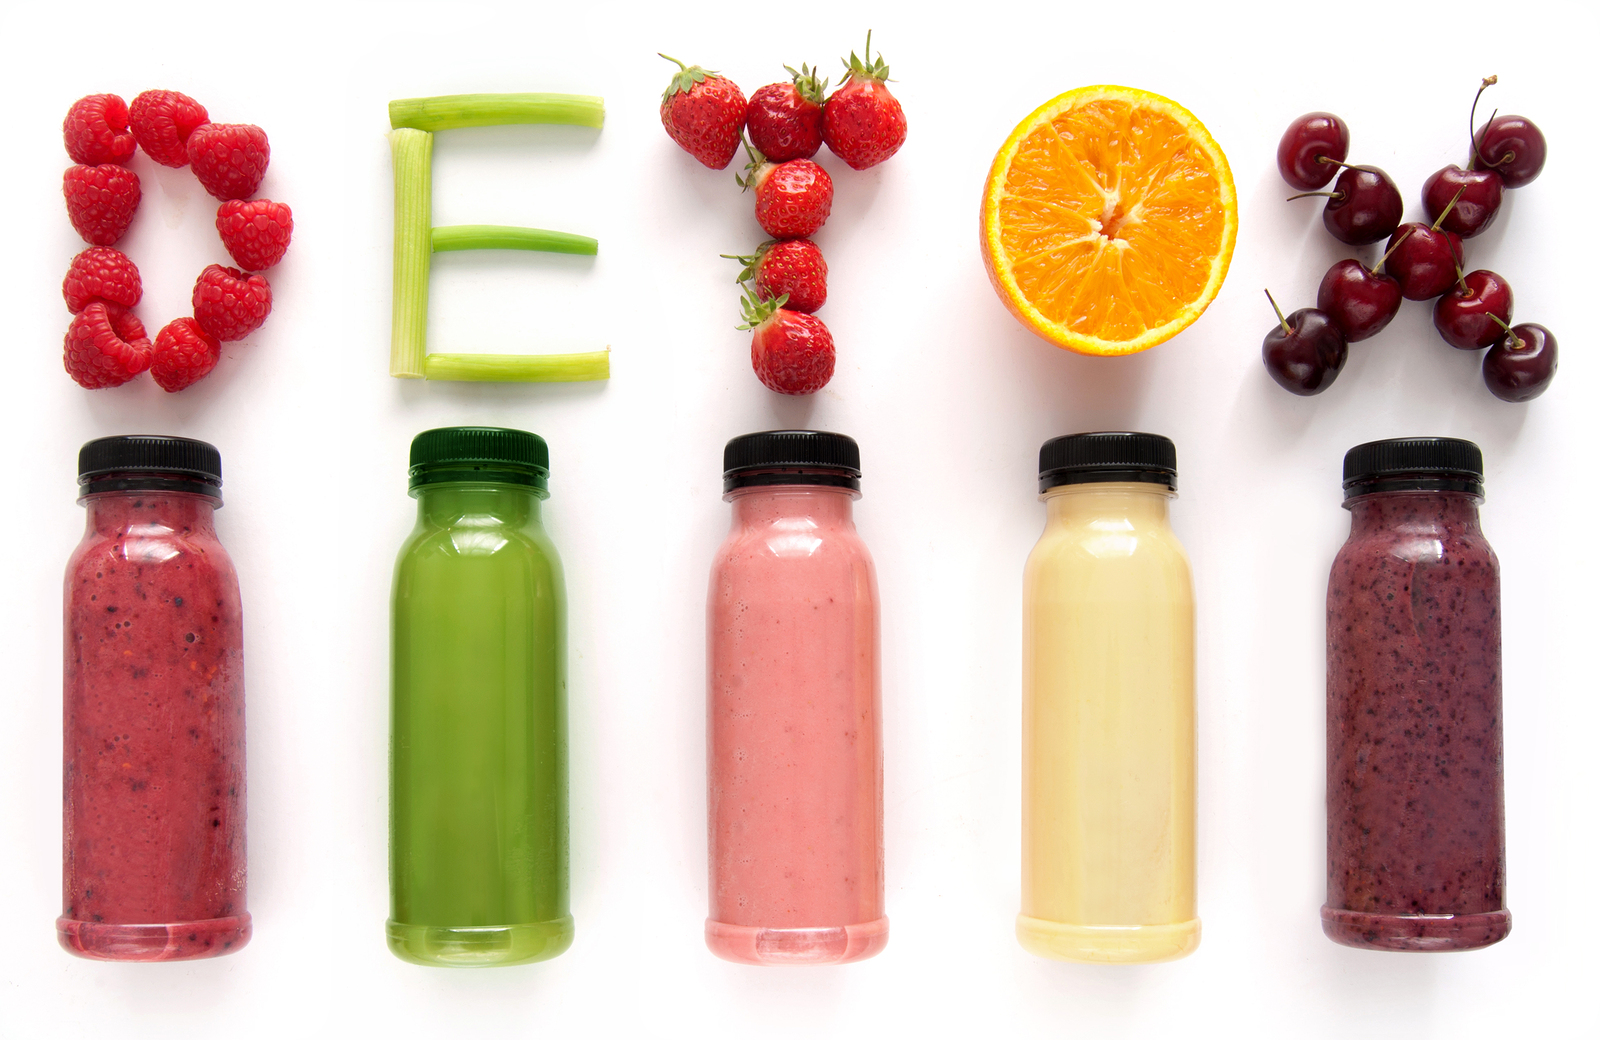 Why try a juice cleanse or detox?